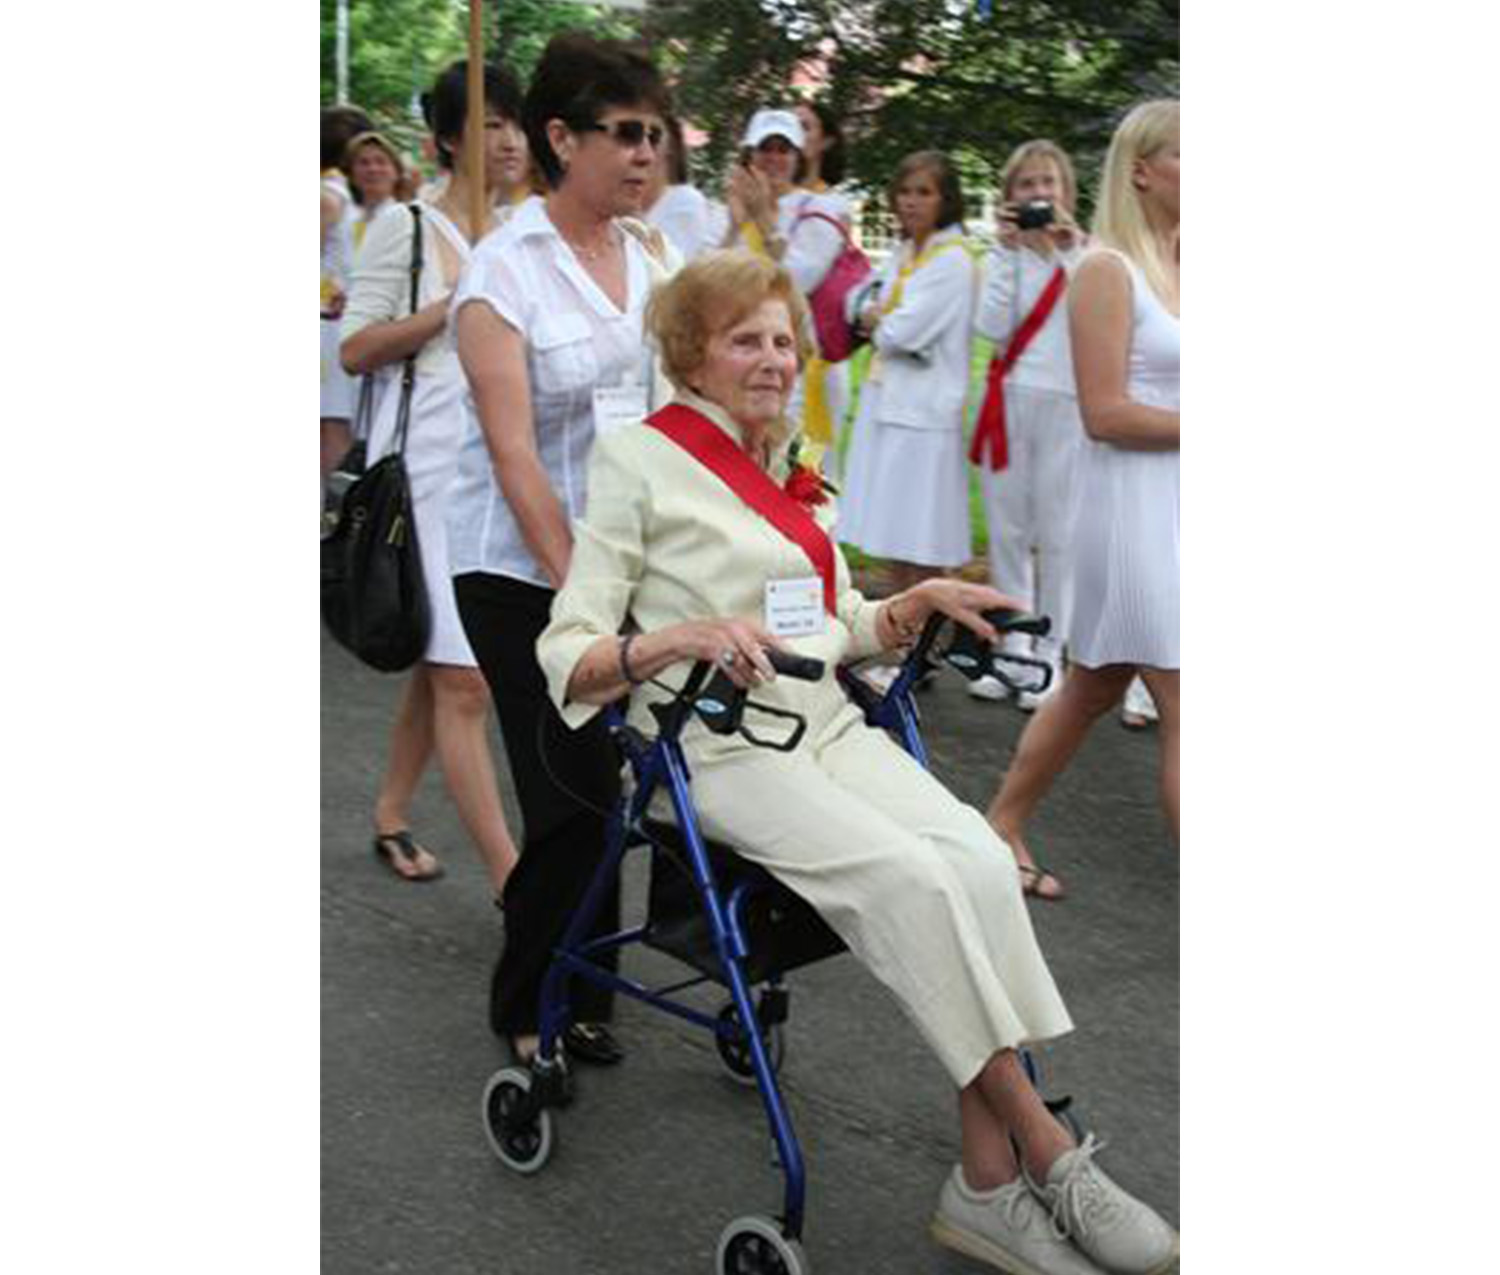 woman wearing white dress and red sash sits in a wheelchair; another woman wearing white is pushing her, and several other women in white walk behind her